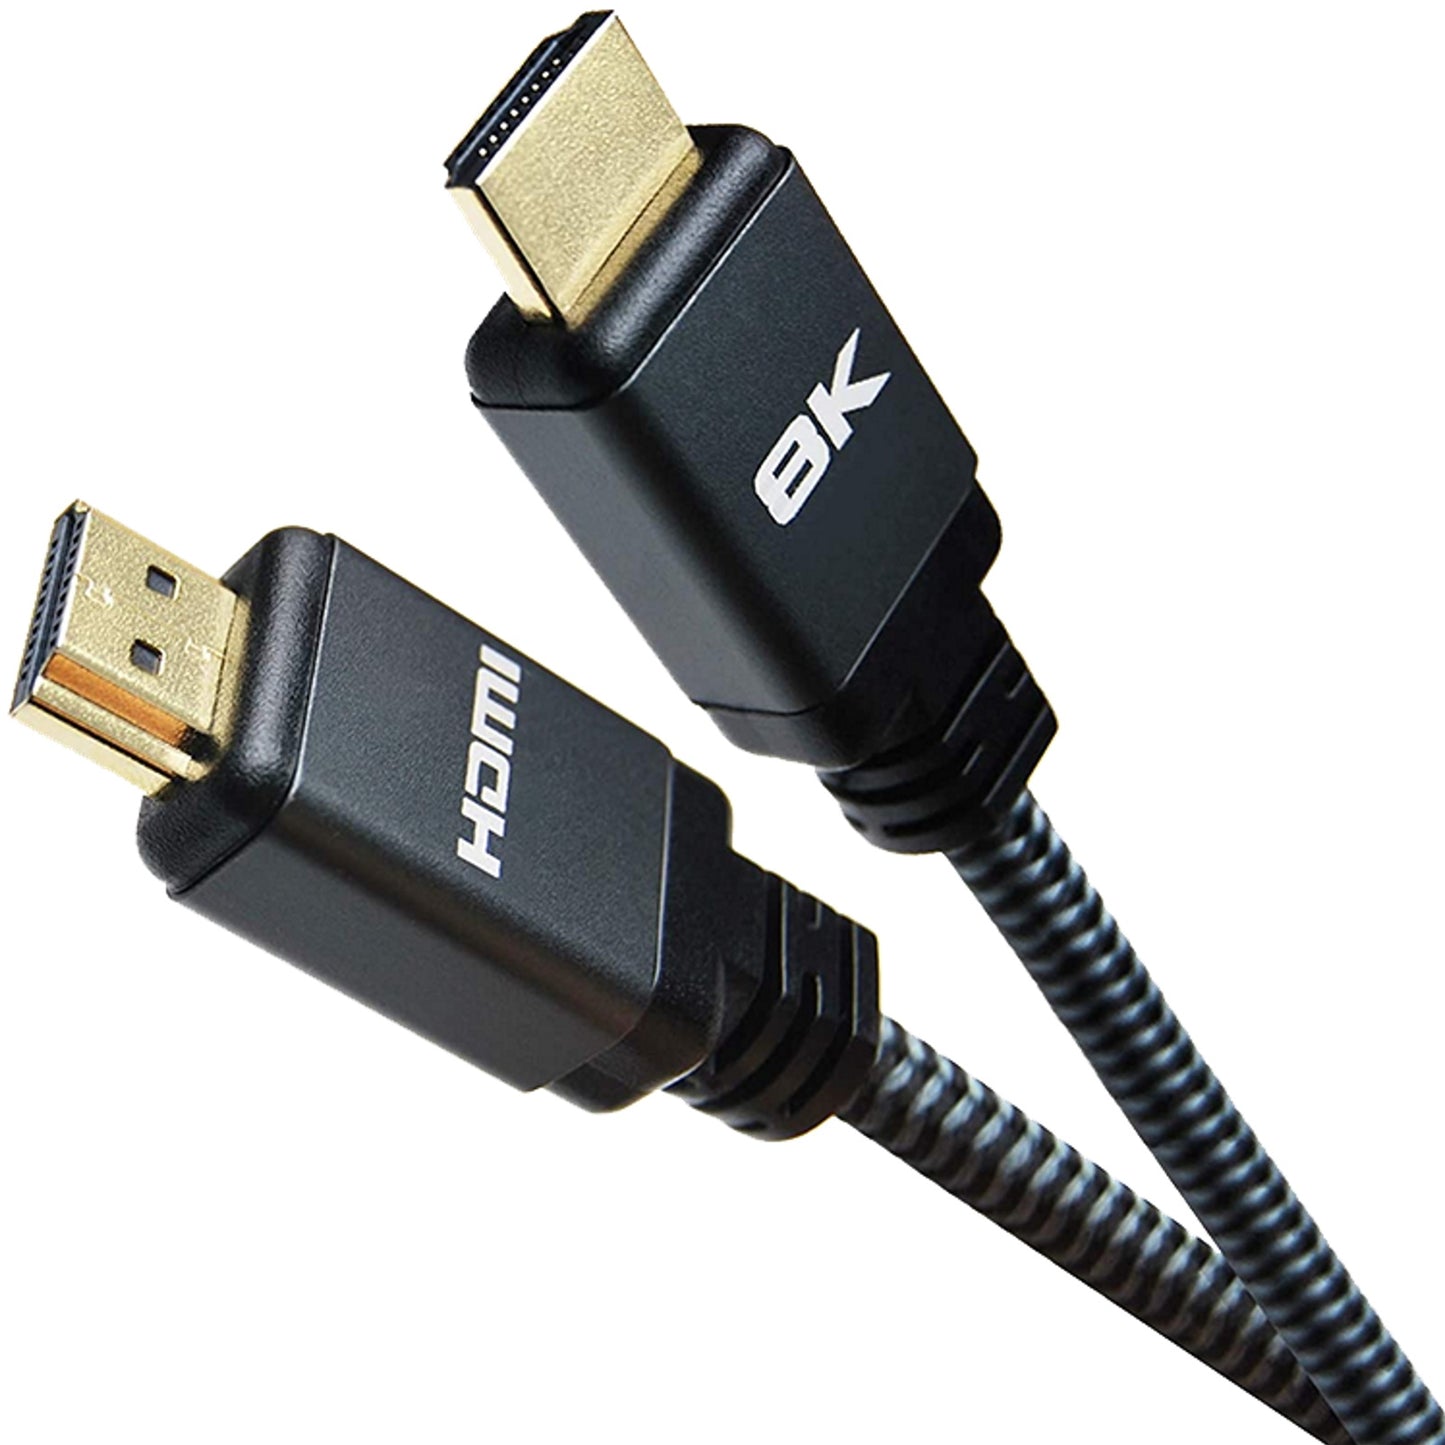 Prevo HDMI-2.1-3M HDMI Cable, HDMI 2.1 (M) to HDMI 2.1 (M), Black & Grey, Supports Displays up to 8K@60Hz, 99.9% Oxygen-Free Copper with Gold-Plated Connectors, Superior Design & Performance